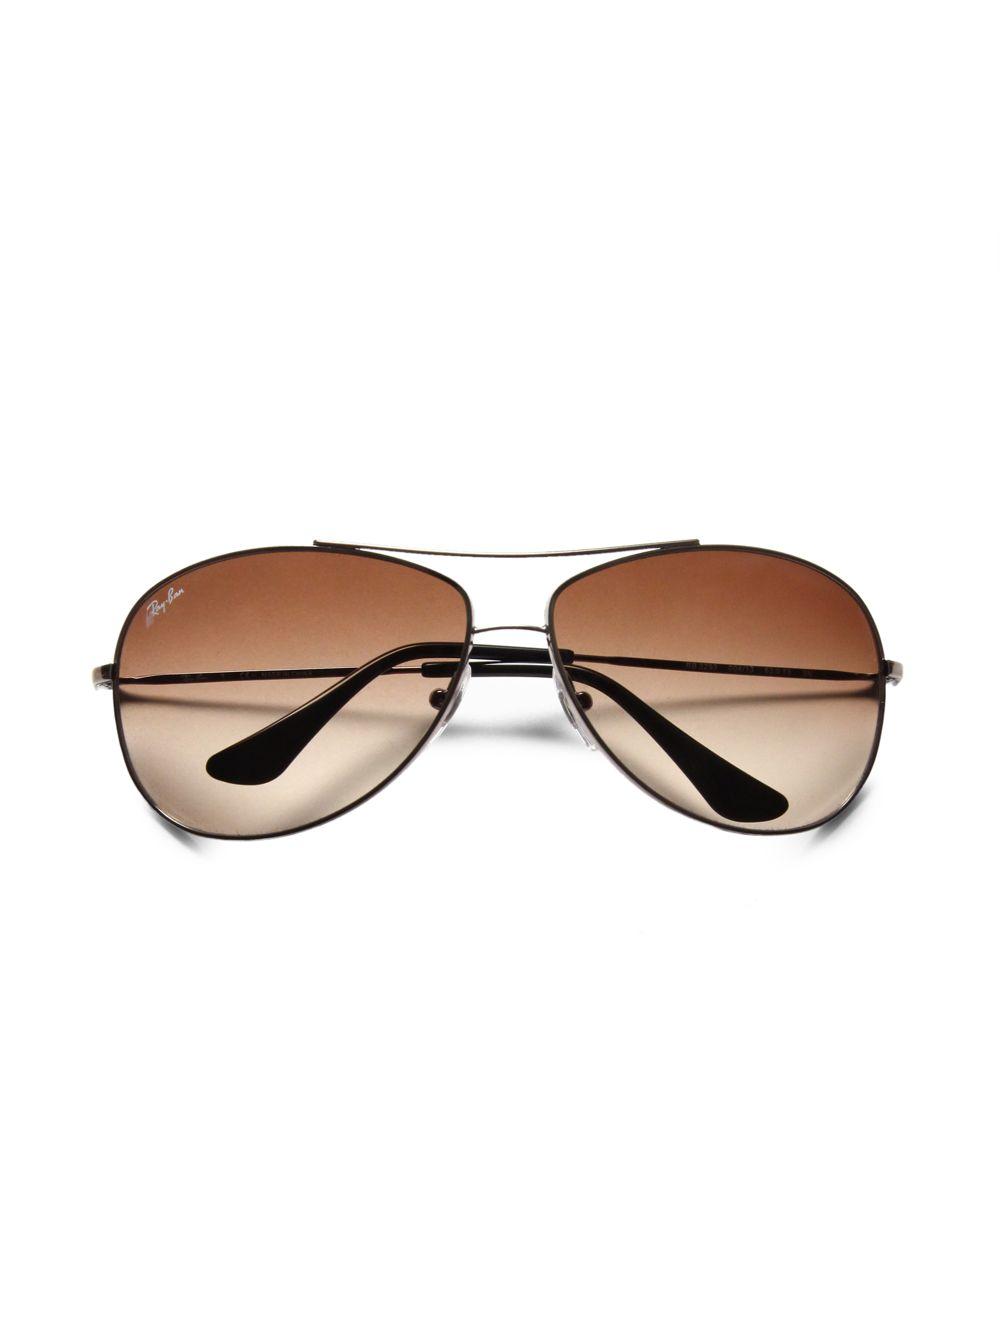 Ray-Ban Rb3293 Wrap Aviator Sunglasses in Gold (Metallic) for Men - Lyst